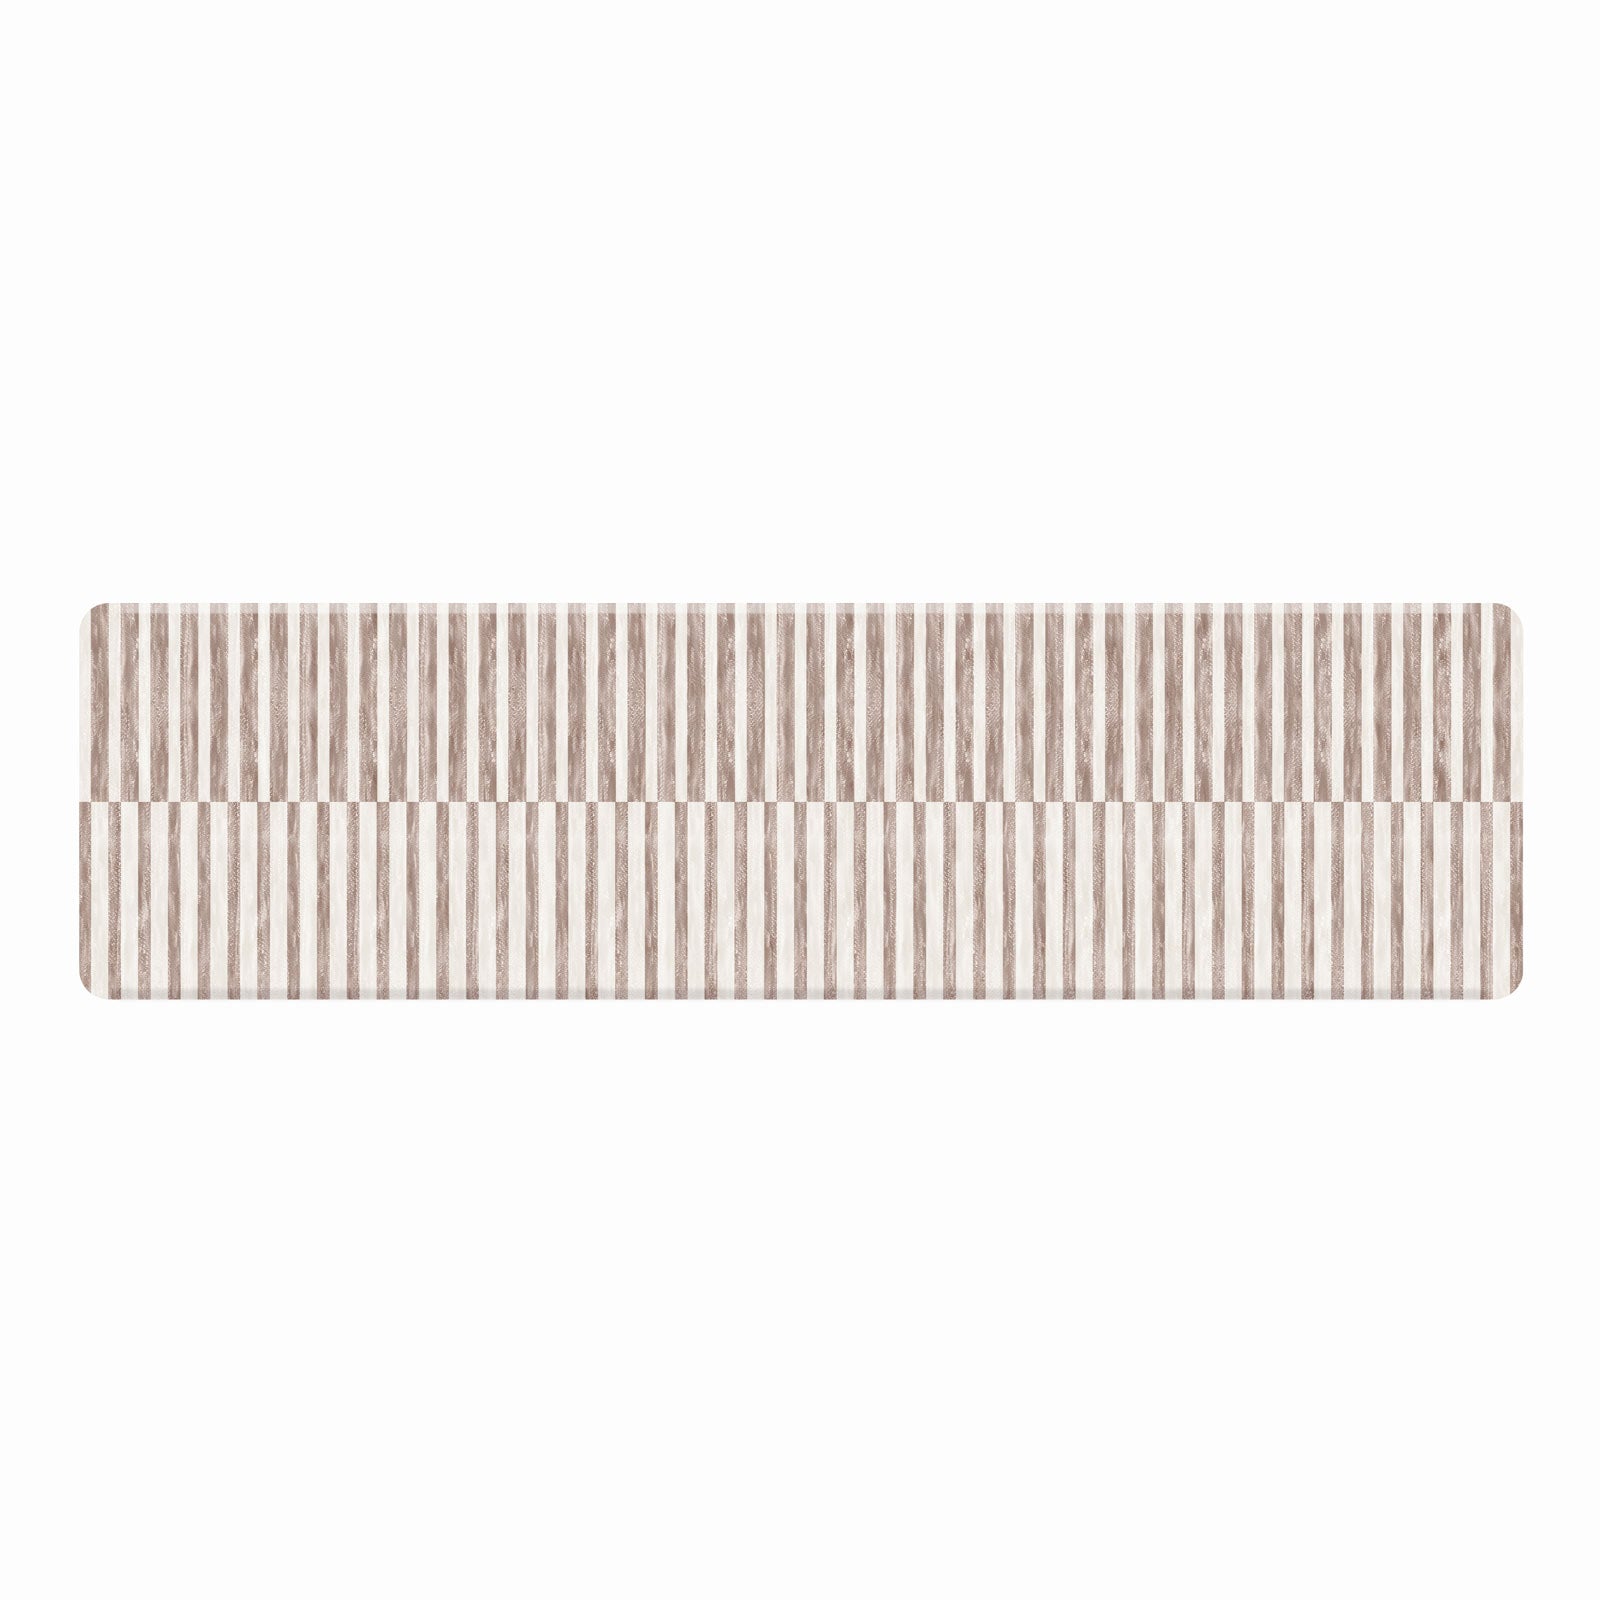 Reese chai beige and white inverted stripe standing mat shown in size 30x108